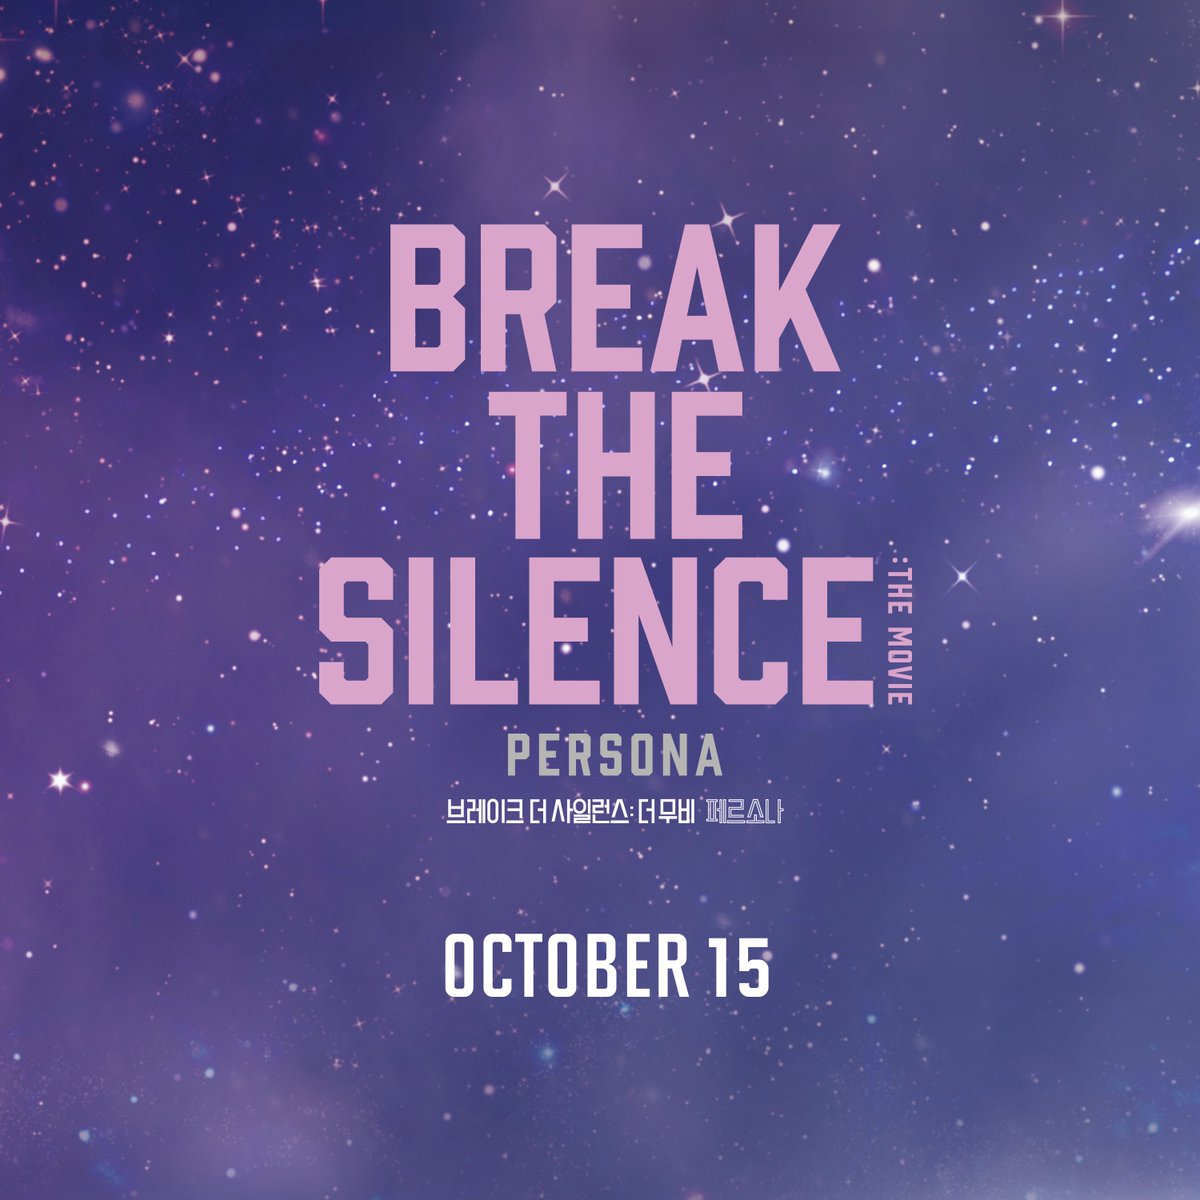 <BREAK THE SILENCE: THE MOVIE>

✔Additional countries/regions set for Oct 15 release!
✔Limited encore screenings also available now.
 
 📍Tickets at BTSinCinemas.com

 #BTS #방탄소년단 #BREAKTHESILENCE_THEMOVIE